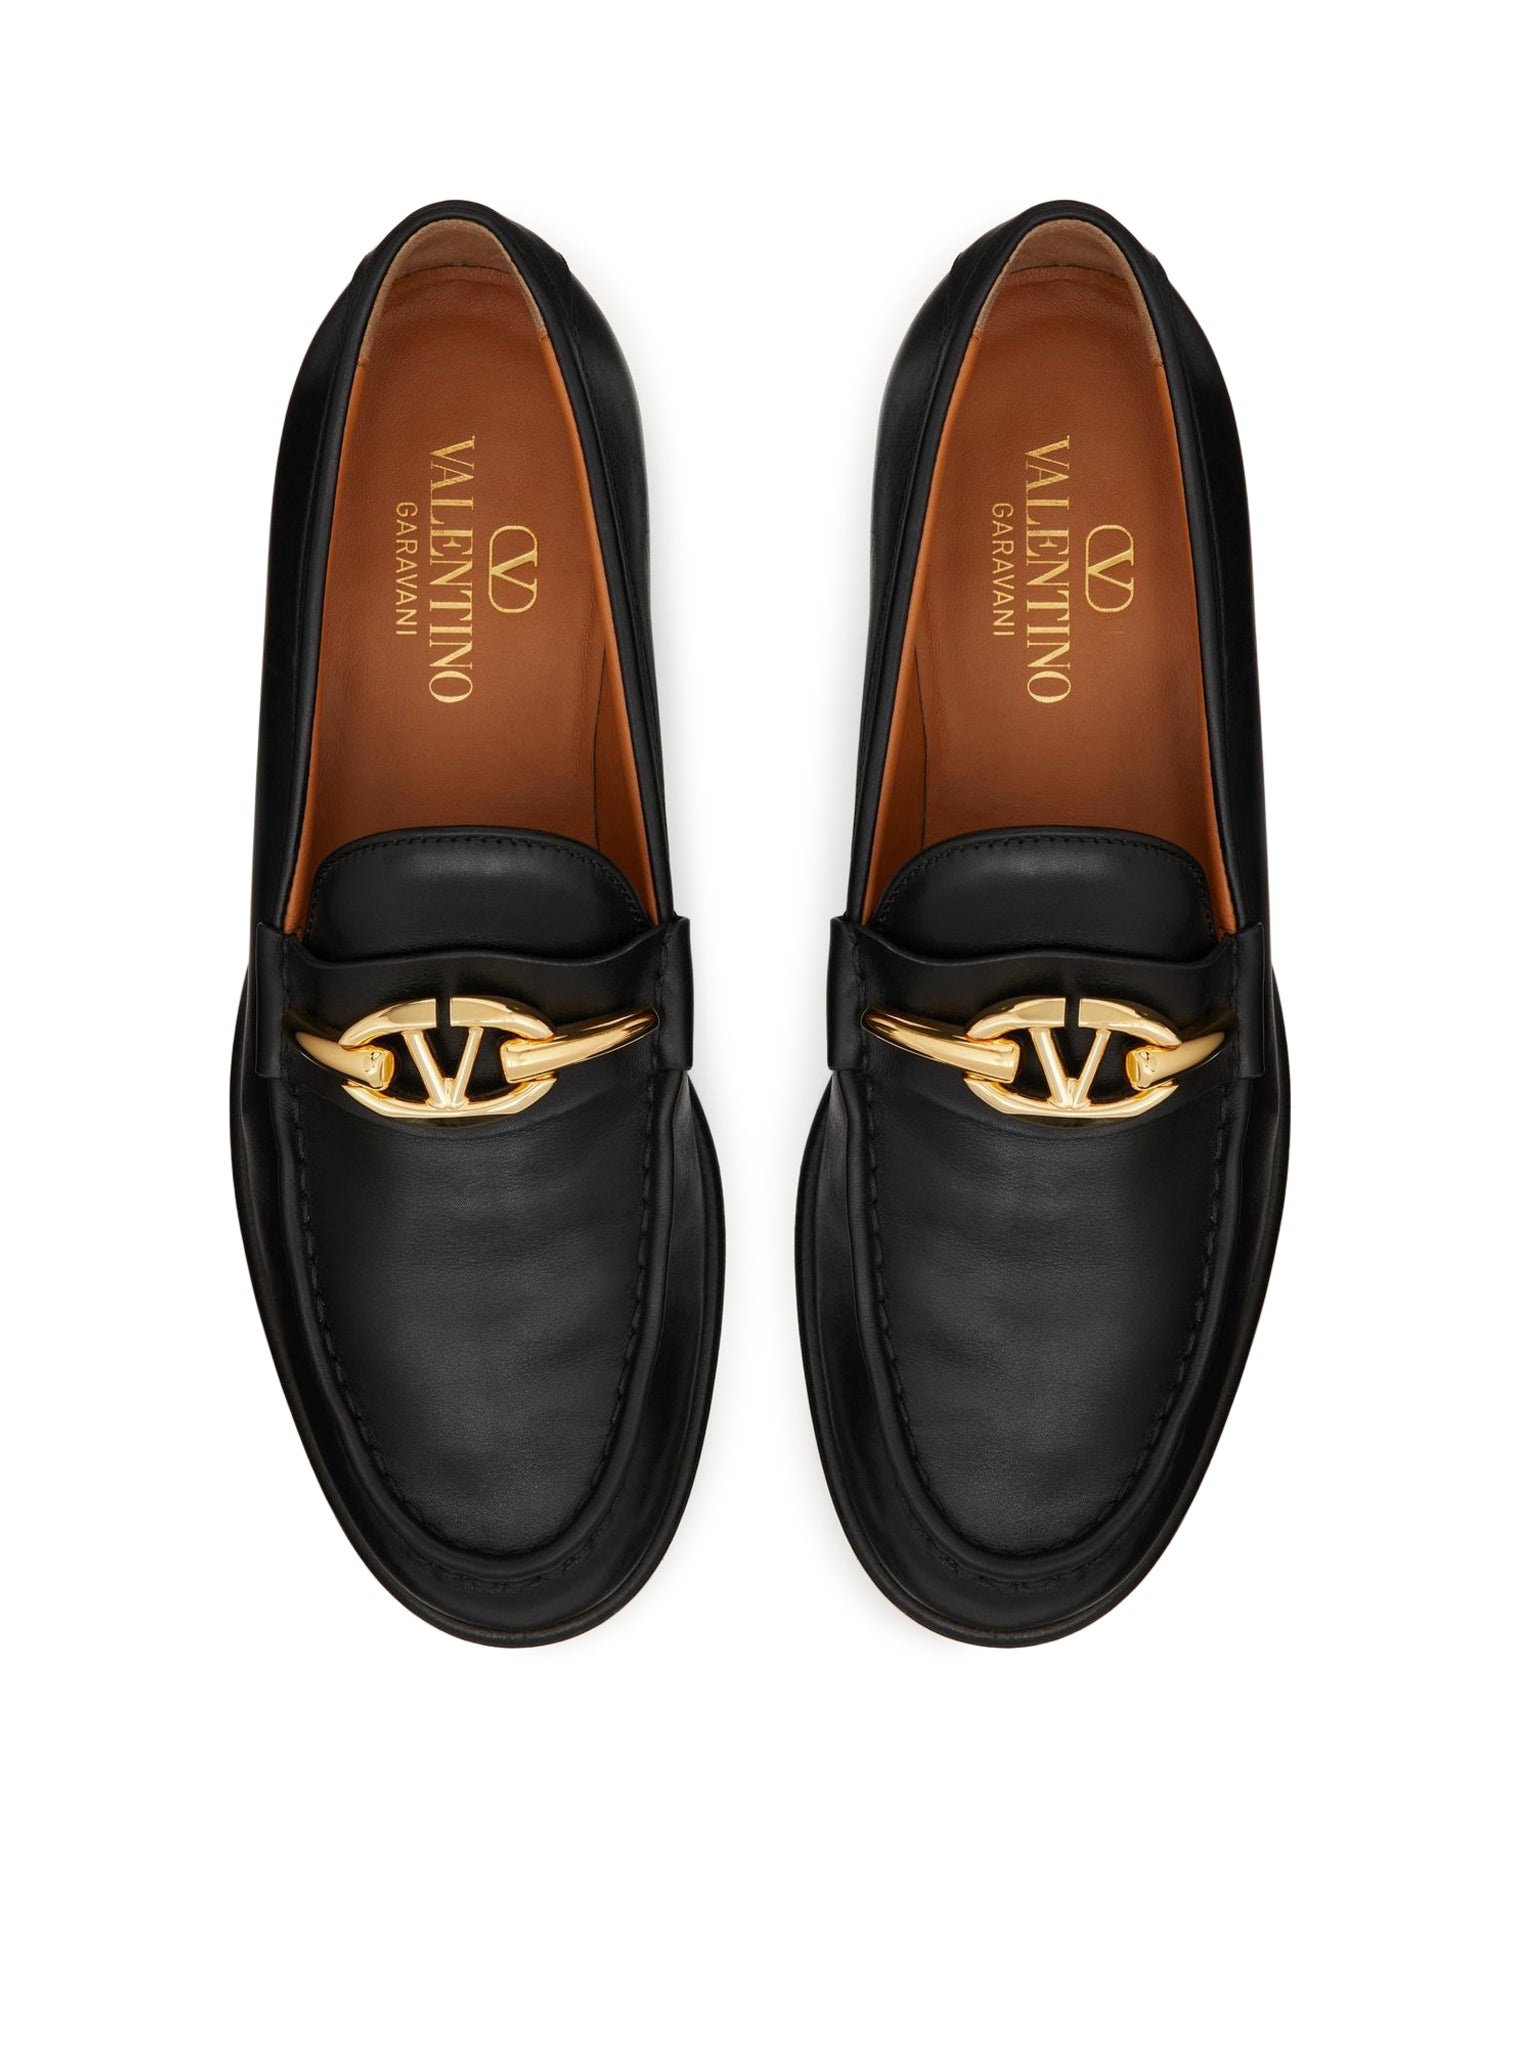 VLOGO THE BOLD EDITION LOAFERS IN CALFSKIN - 5